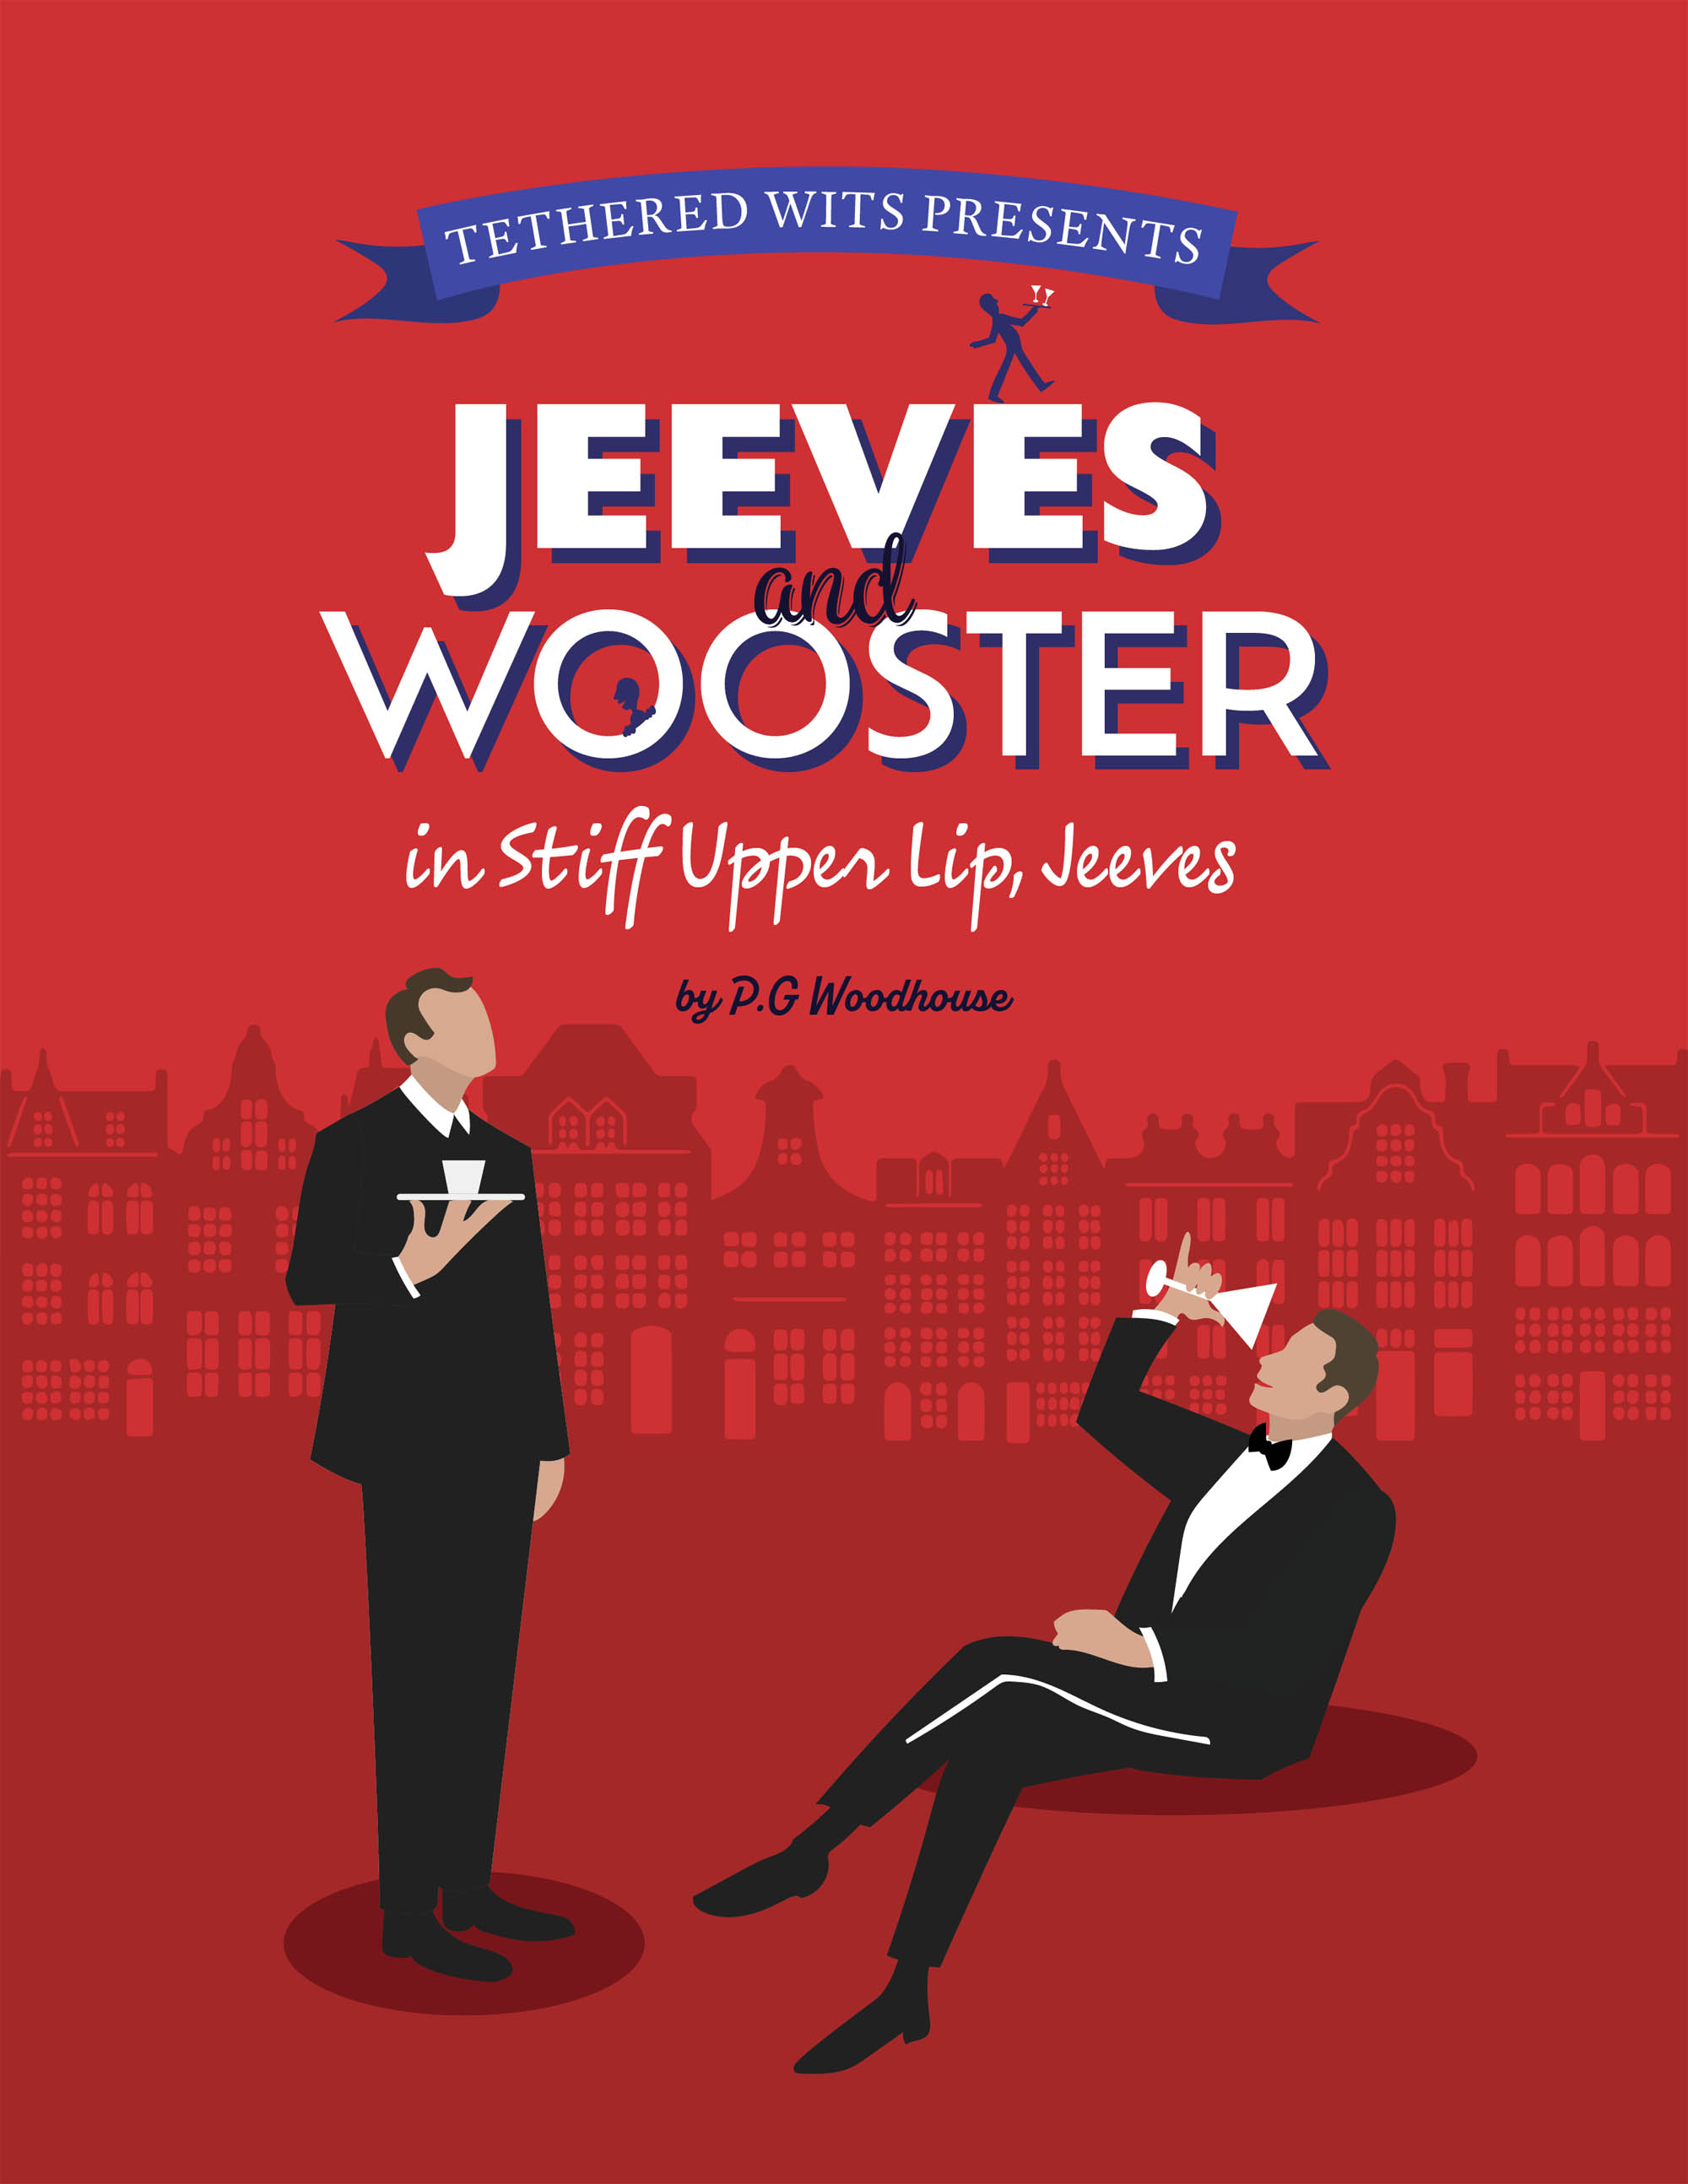 Outdoor Theatre -  Jeeves and Wooster in ‘Stiff Upper Lip’